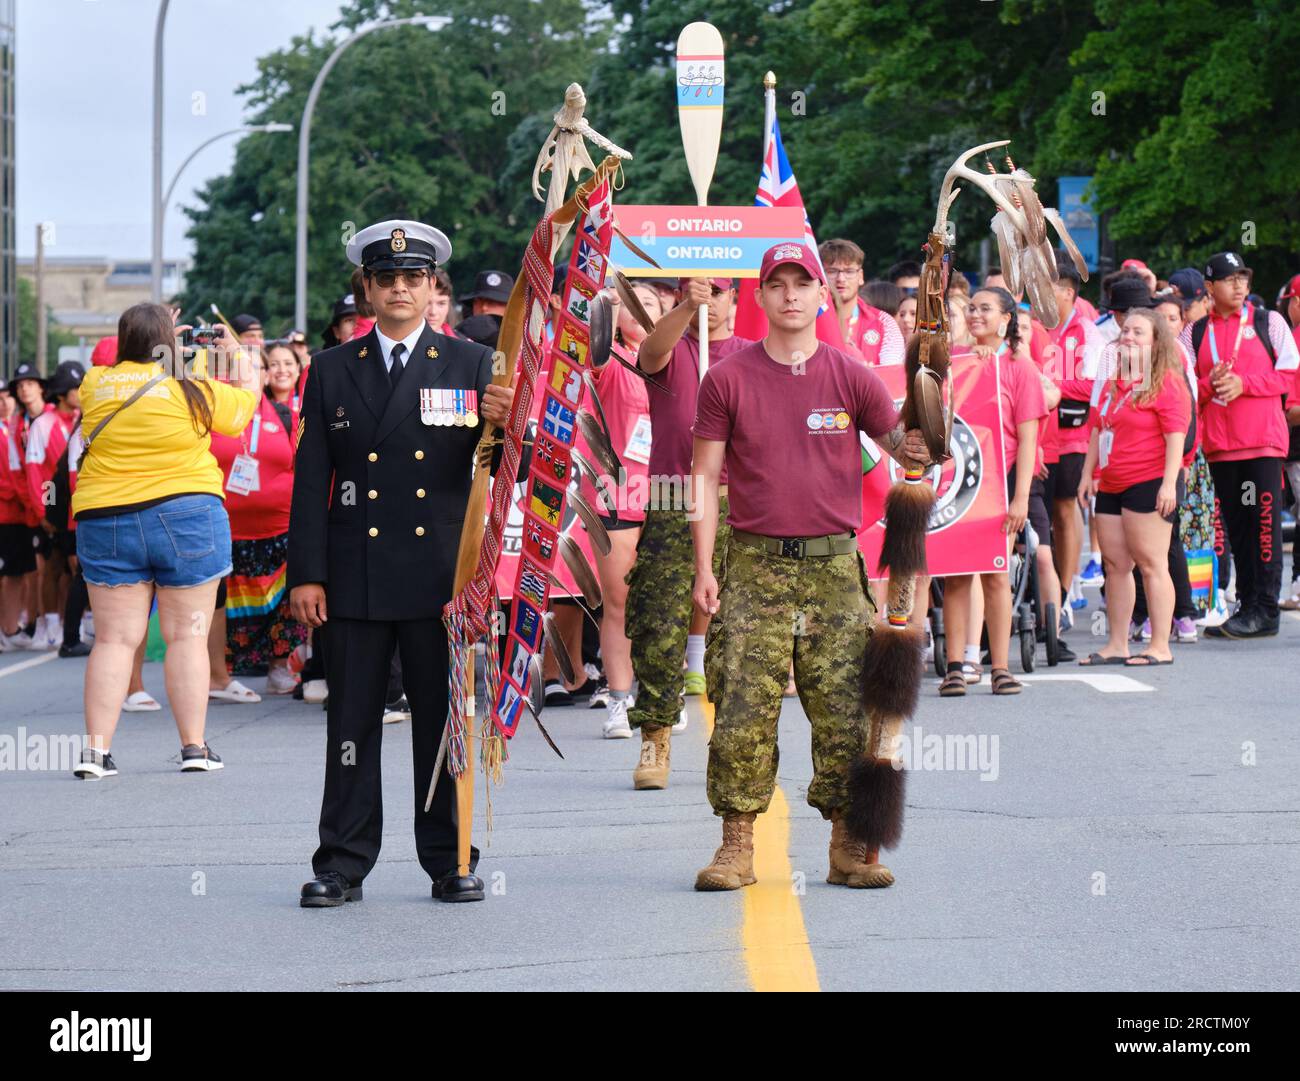 Halifax, Nova Scotia, Canada. July 16th, 2023. The lead of the athletes Parade of the opening ceremony of the 10th North American Indigenous Games (NAIG) on the streets of Kjipuktuk (Halifax), followed by the delegation from Ontario. Over 5000 athletes from 756 Indigenous Nations across Turtle Island will be competing until July 23rd with competitions in 16 sports within 21 venues across the area. Credit: meanderingemu/Alamy Live News Stock Photo